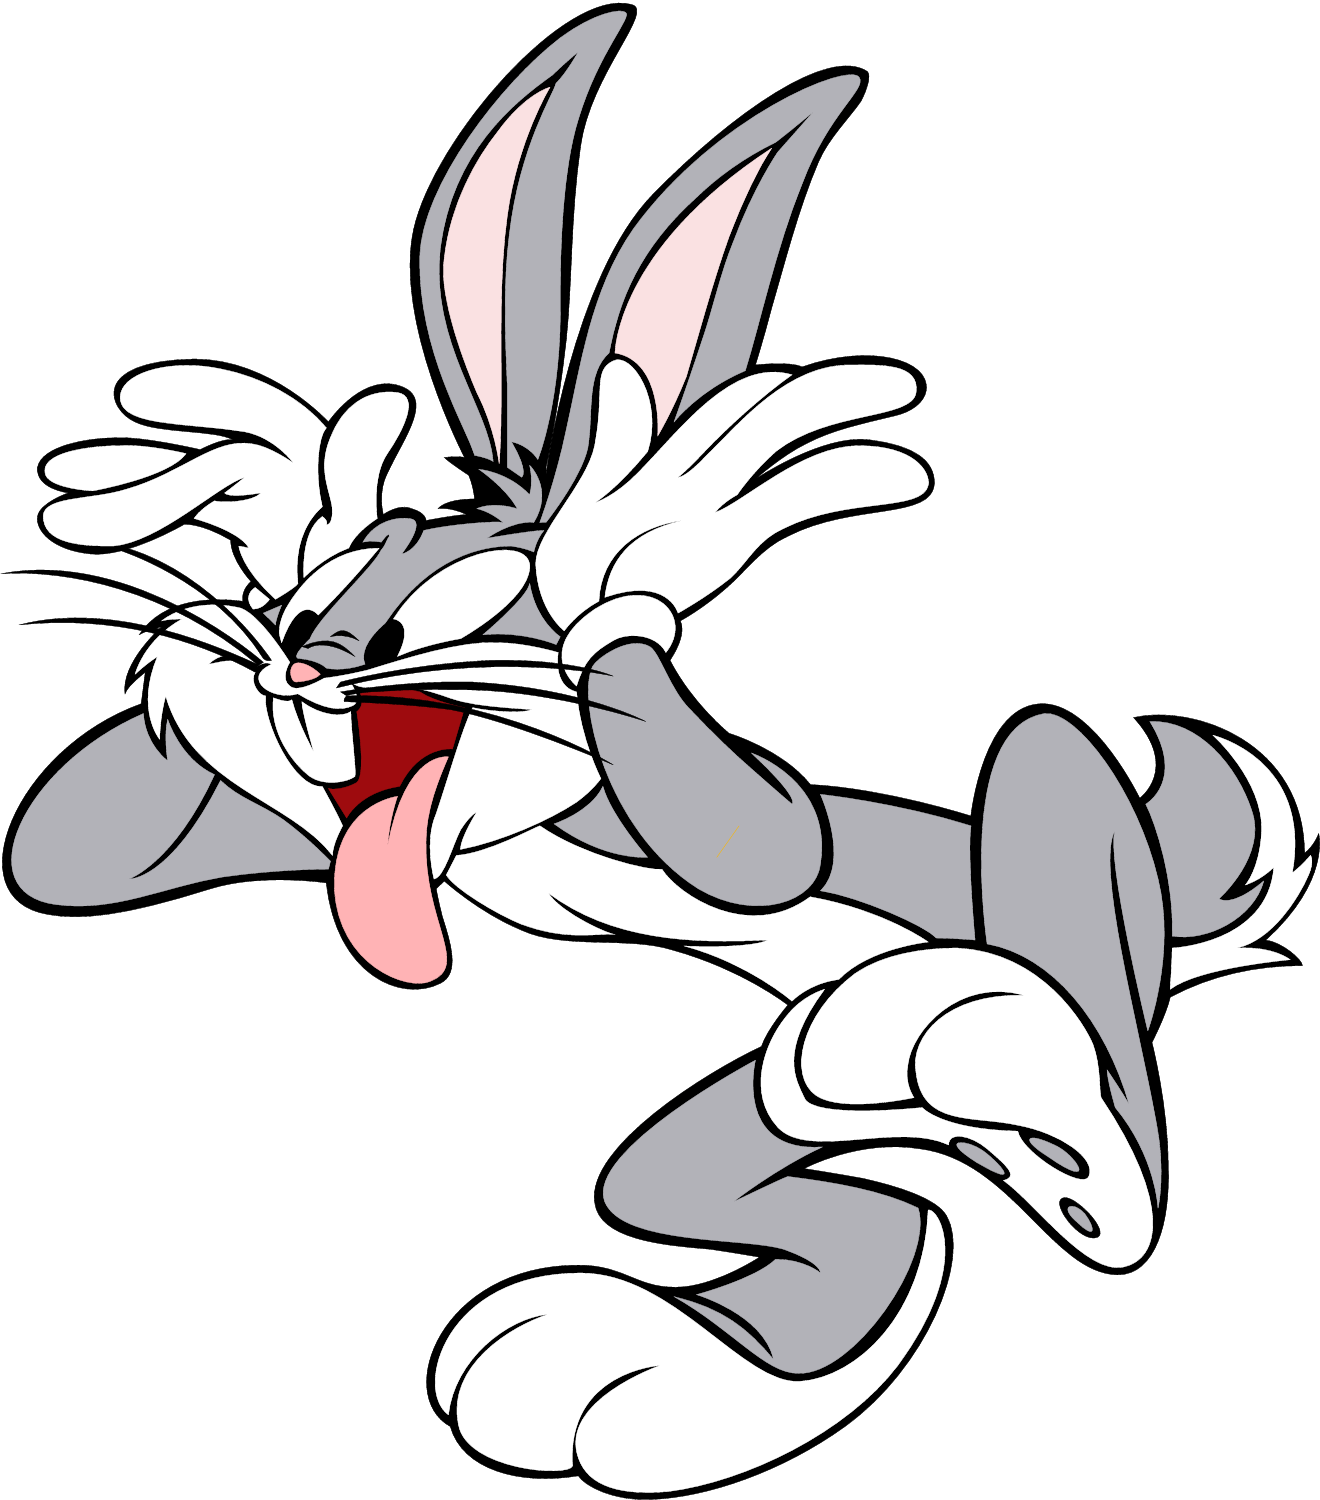 Face itoons pinterest and. Clipart easter bugs bunny